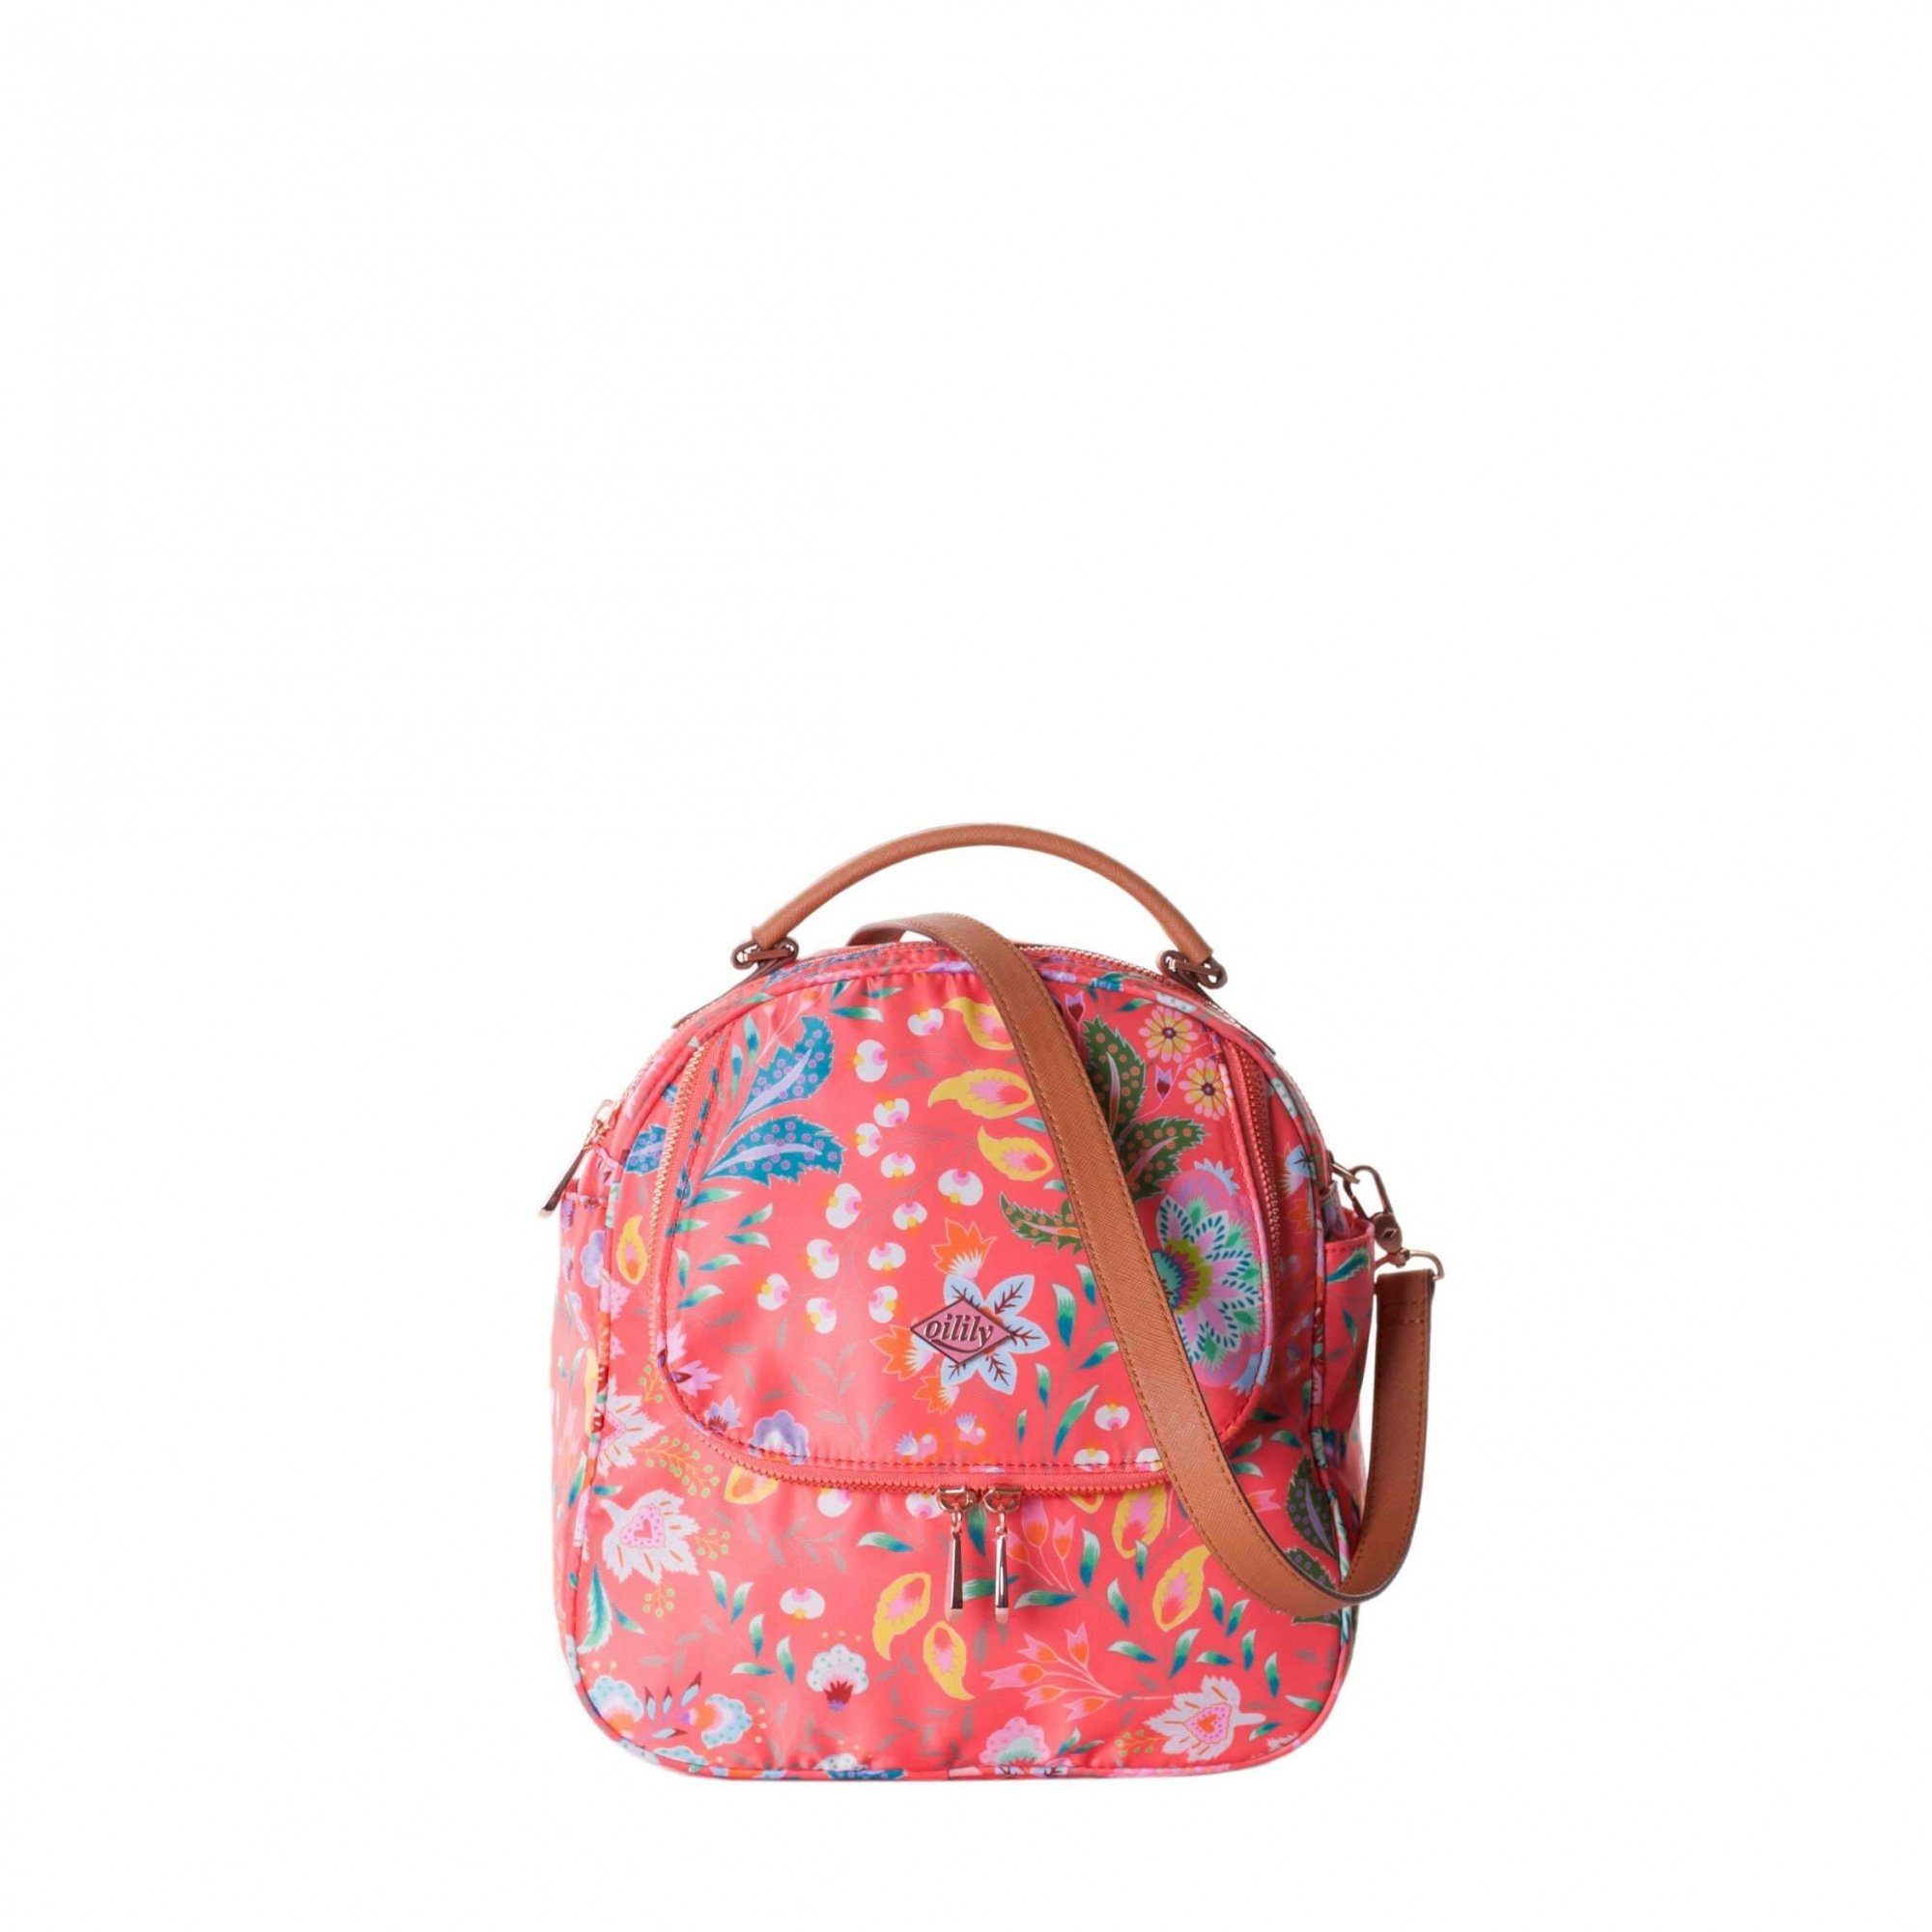 Coral Schultertasche Hot Oilily